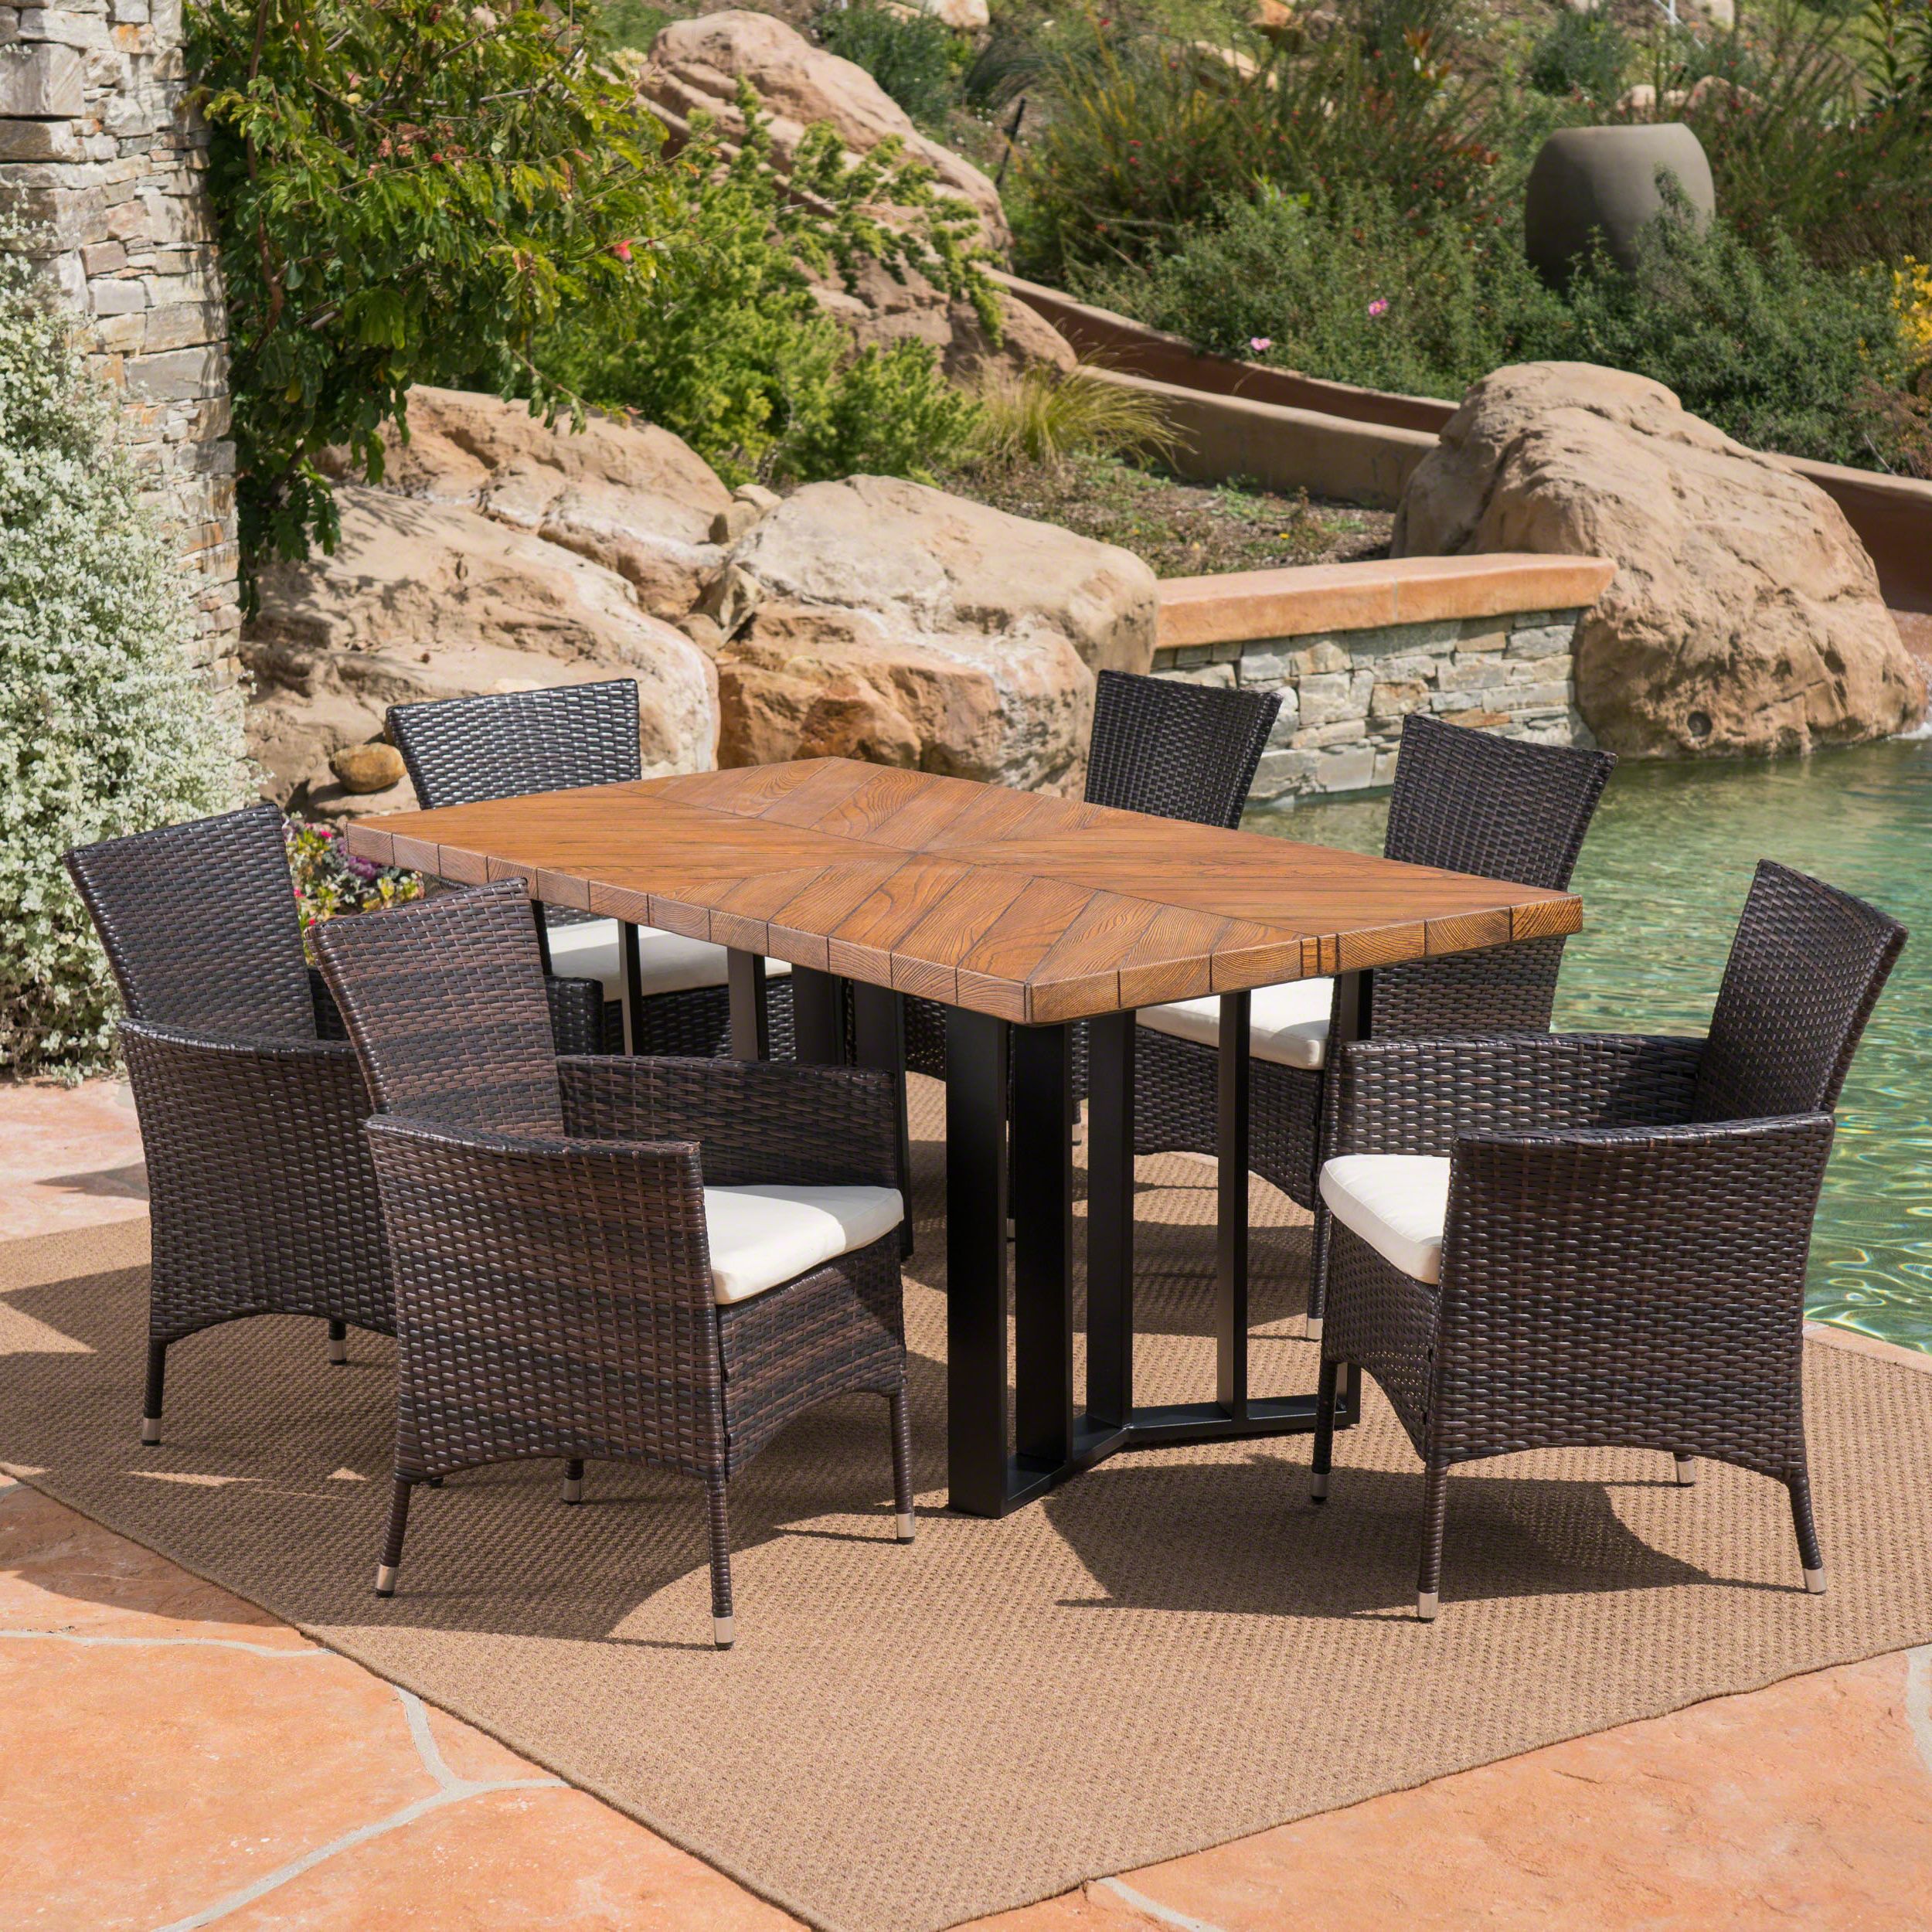 Tyler Outdoor 7 Piece Wicker Dining Set With Finish Light Weight With Regard To Most Up To Date Patio Dining Sets With Cushions (View 2 of 15)